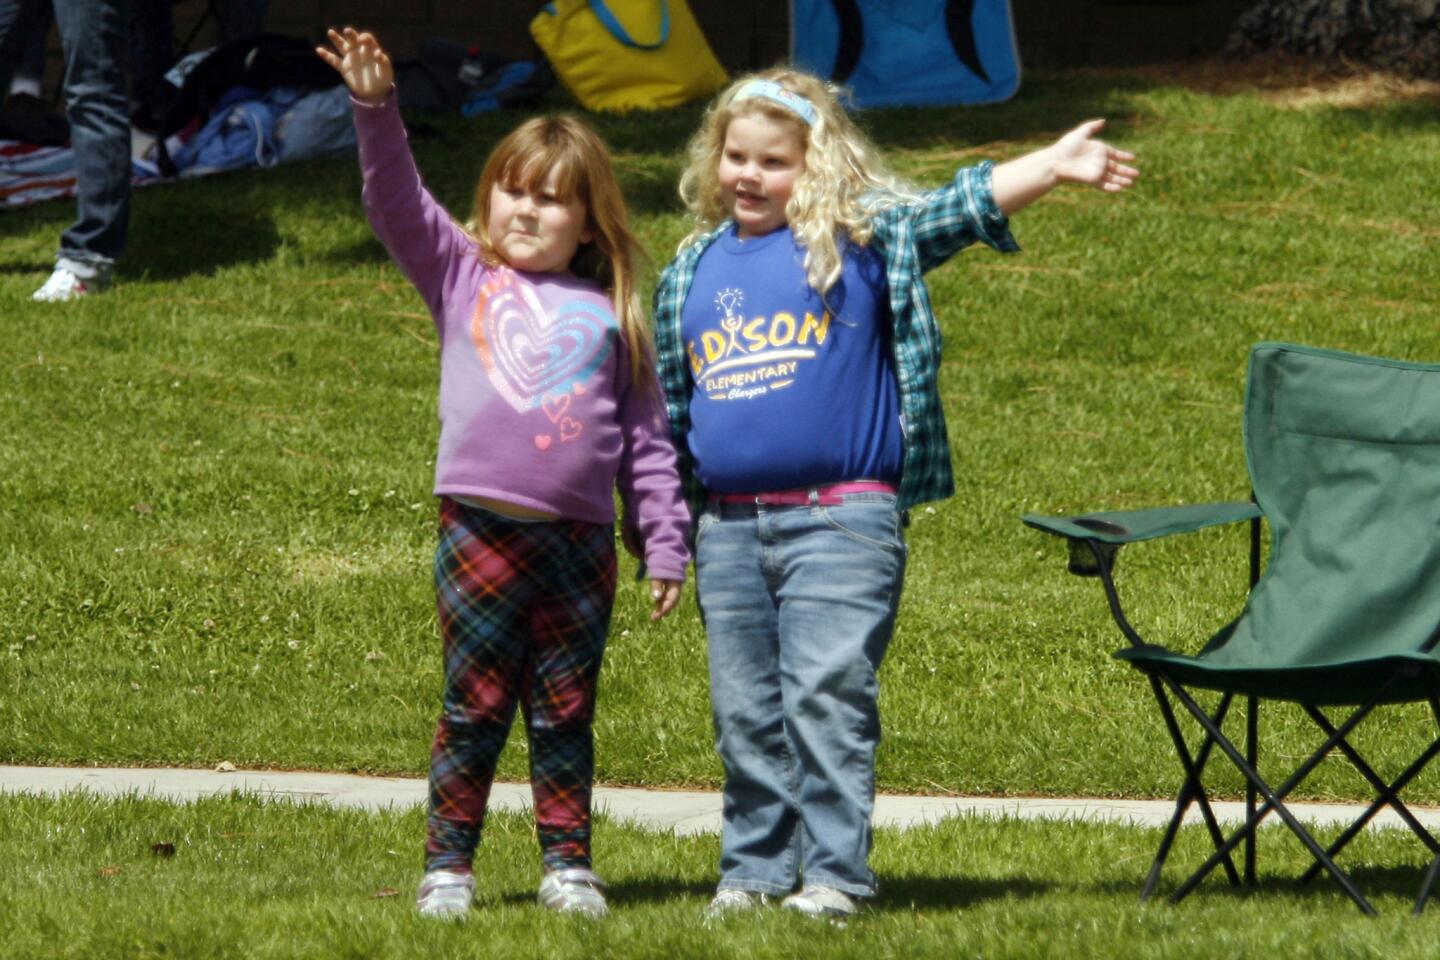 Meghan Hesley, 6, left, and Madison Lynch, 6, wave to participants during Burbank on Parade, which took place on Olive Ave. between Keystone St. and Lomita St. on Saturday, April 14, 2012.